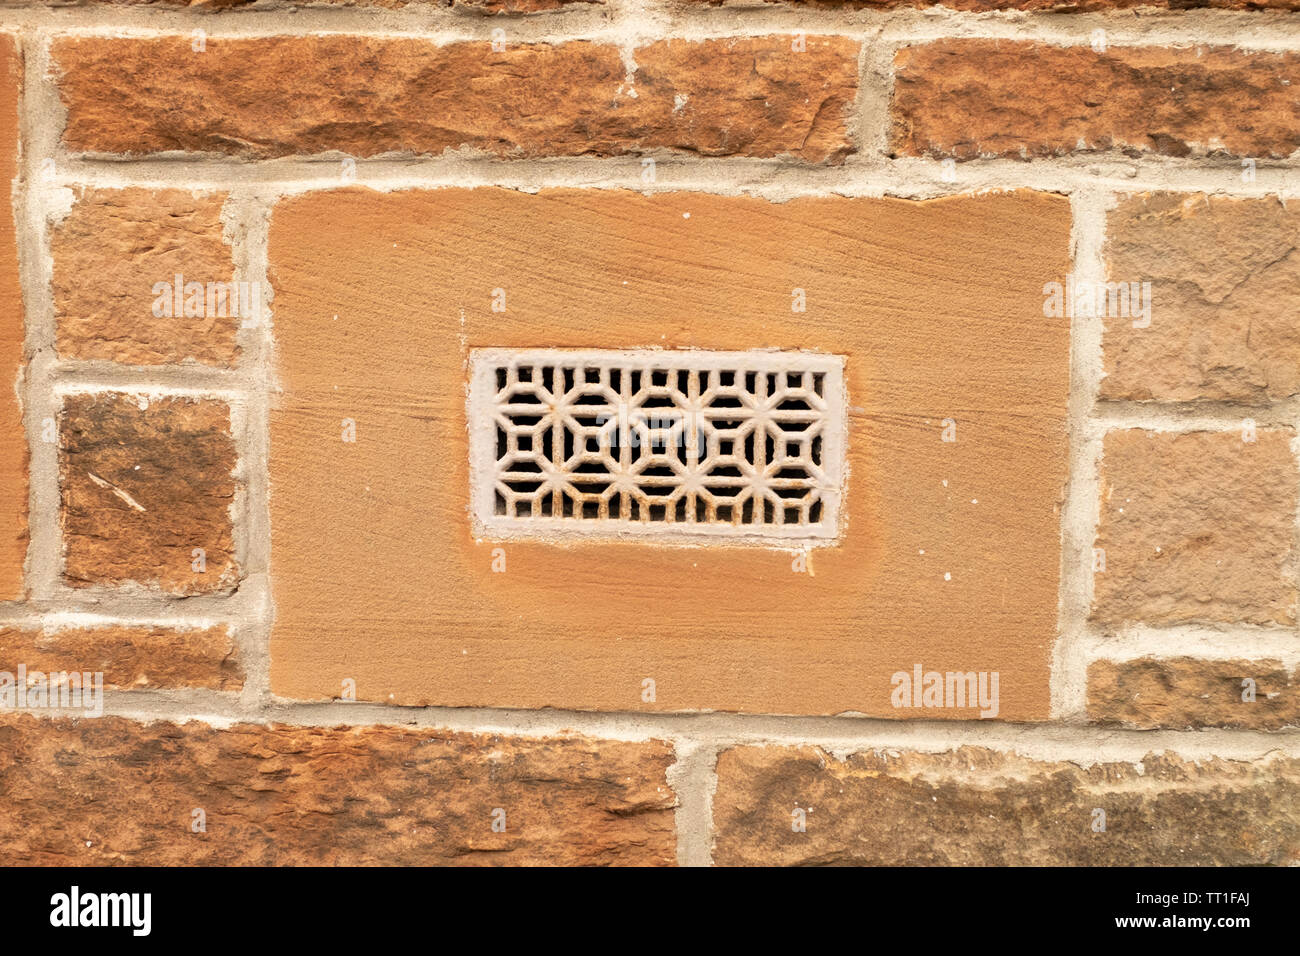 Ventilation Grill High Resolution Stock Photography and Images - Alamy